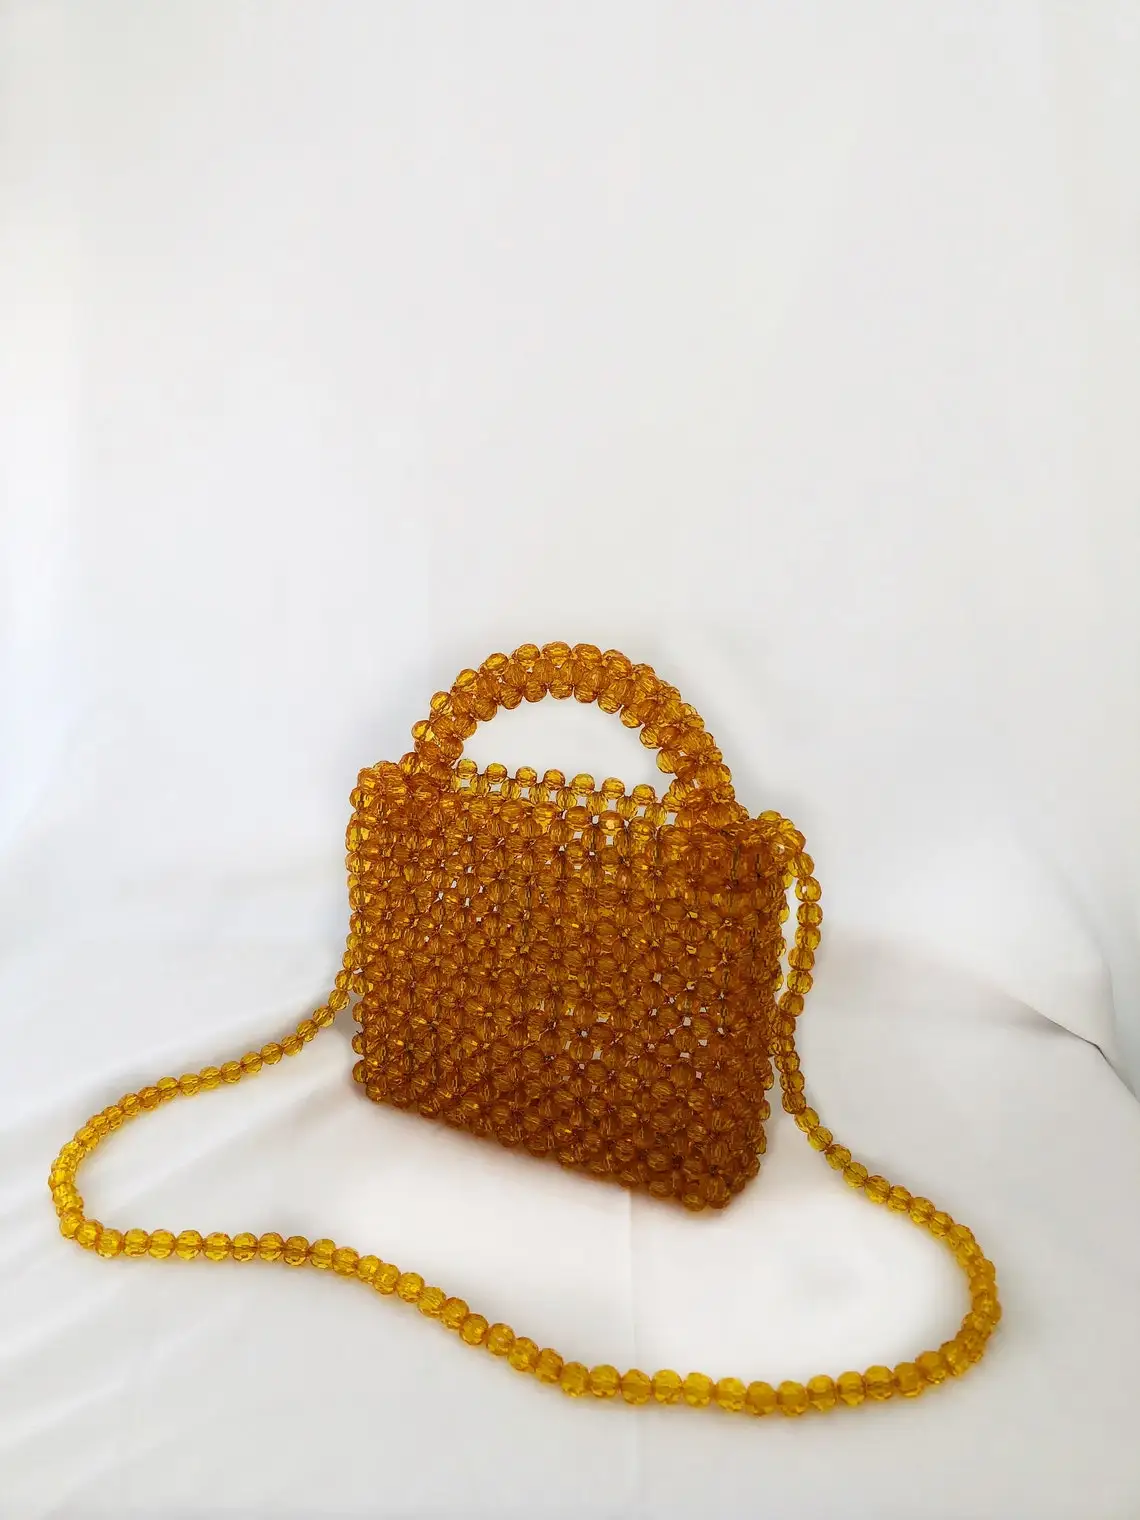 Customized Famous Brand Bead Bag Lilac Hand-Woven Celebrity Handbags Unique Design Ladies Party Top-handle Purses and Handbags